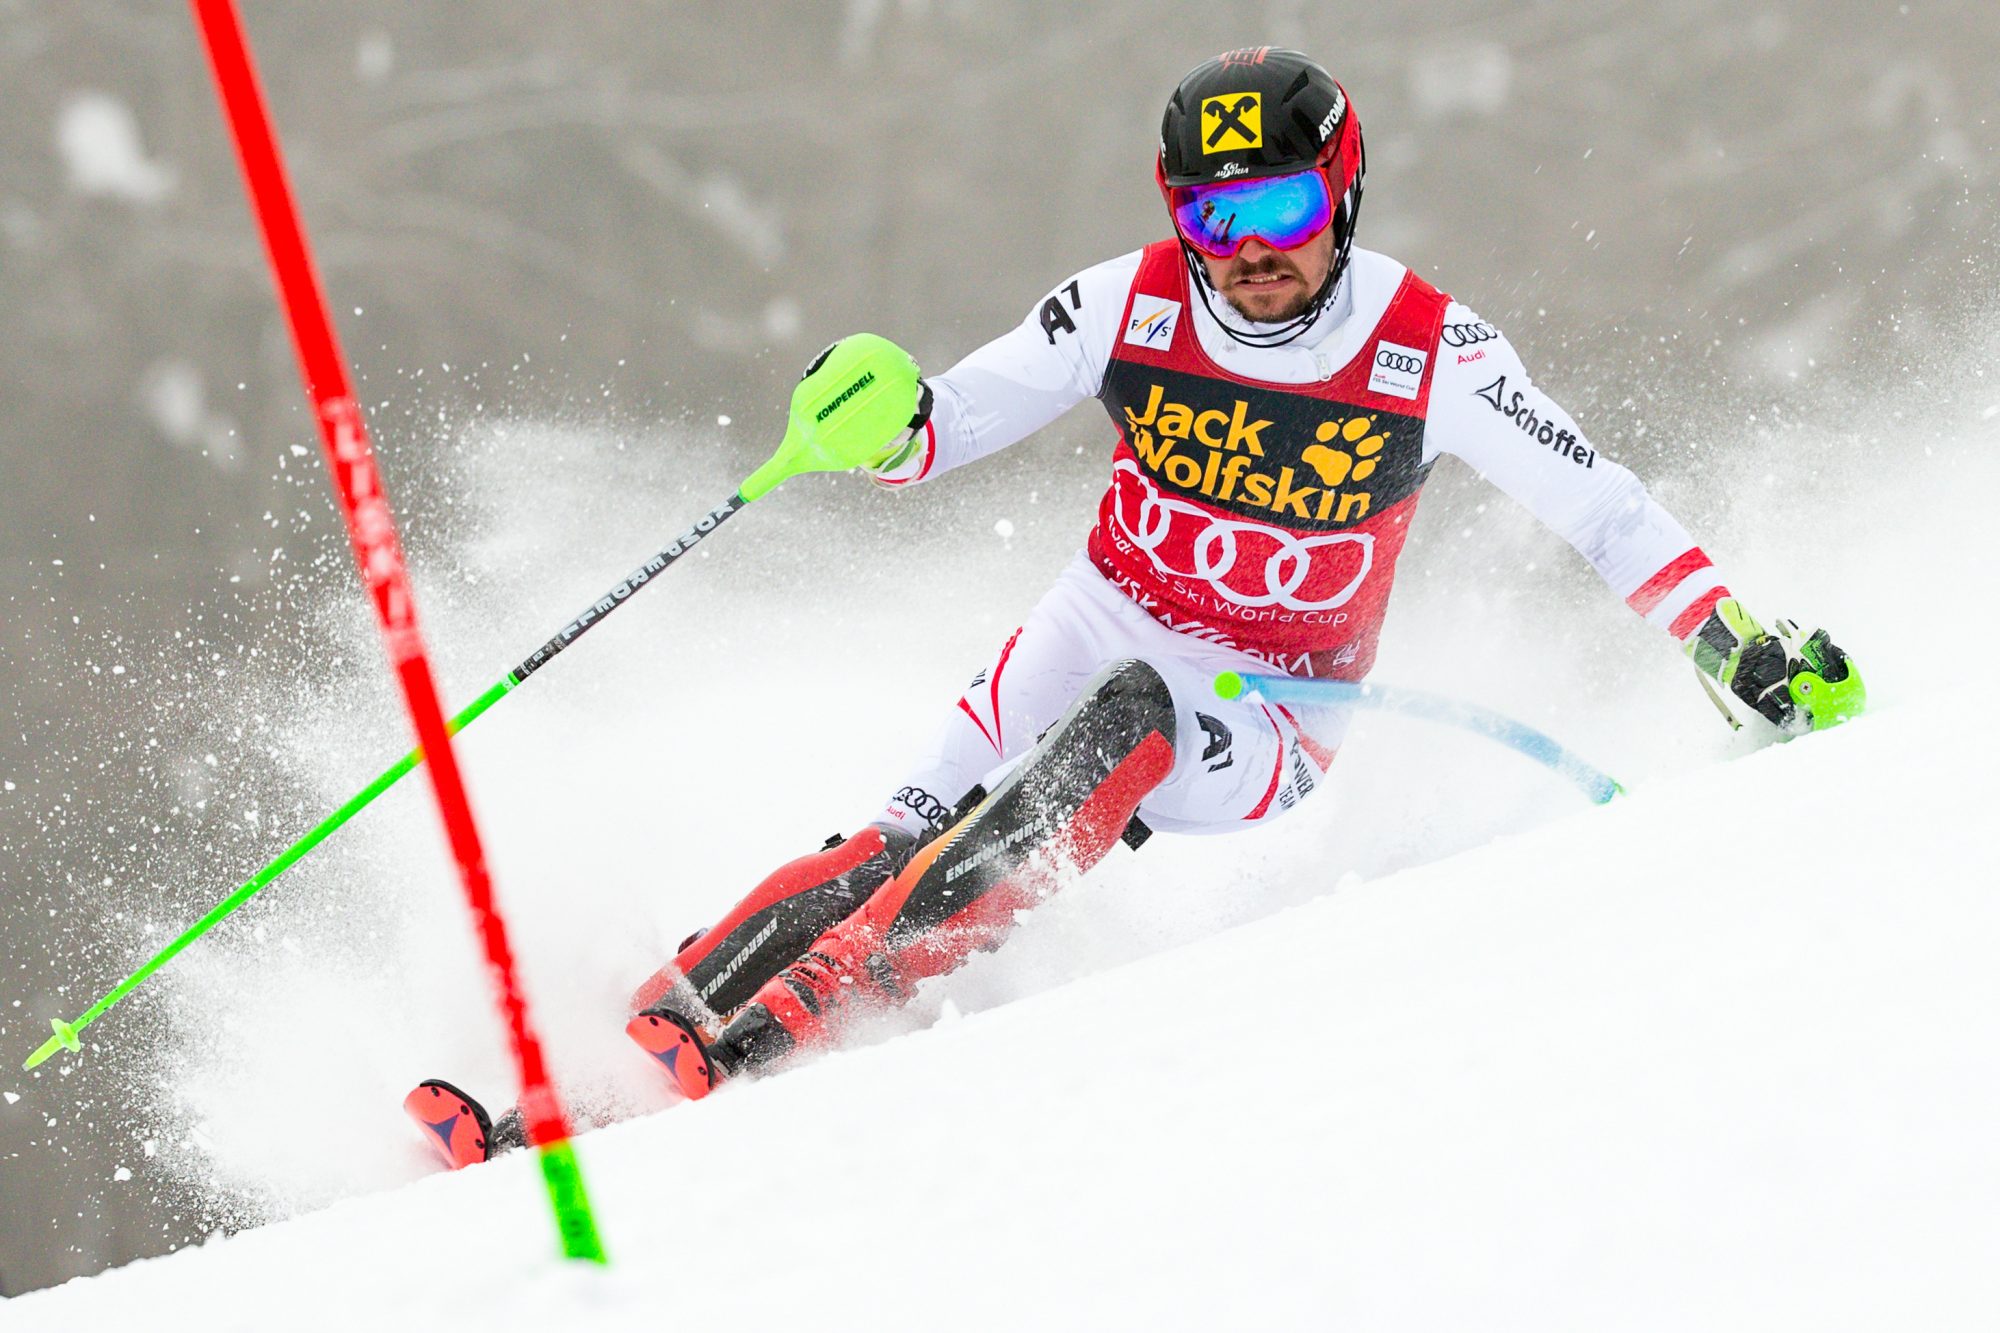 Marcel Hirscher &#8211; 7 Overall World Cup Titles but “I’m Not the Better Skier”